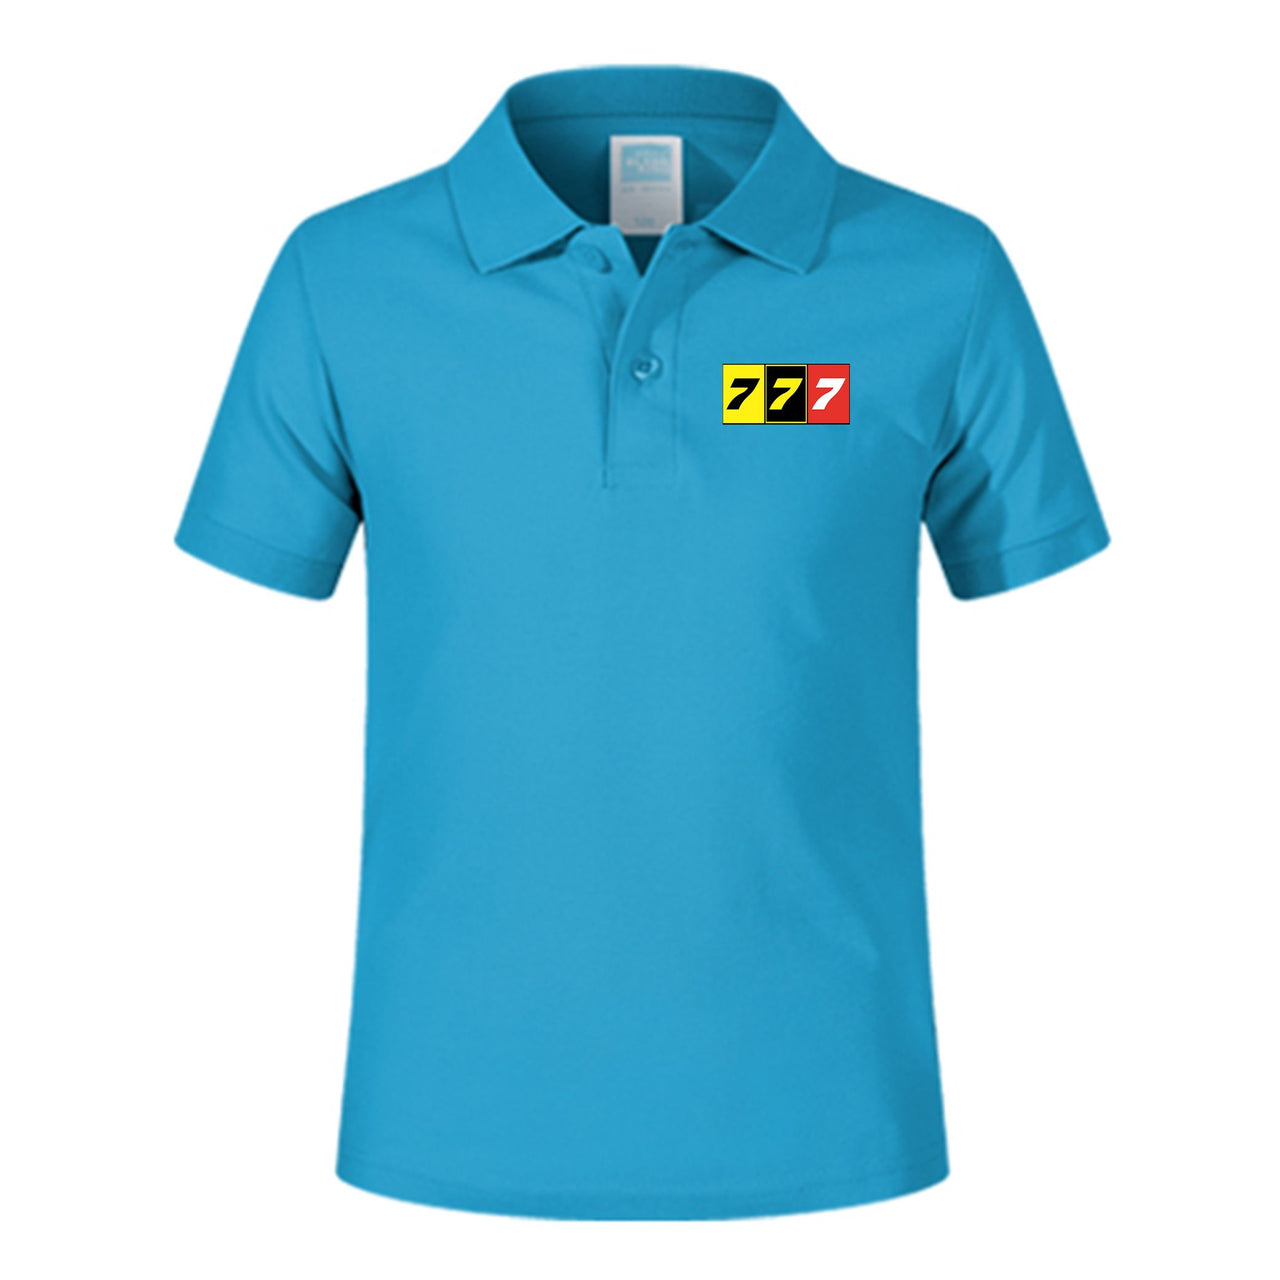 Flat Colourful 777 Designed Children Polo T-Shirts